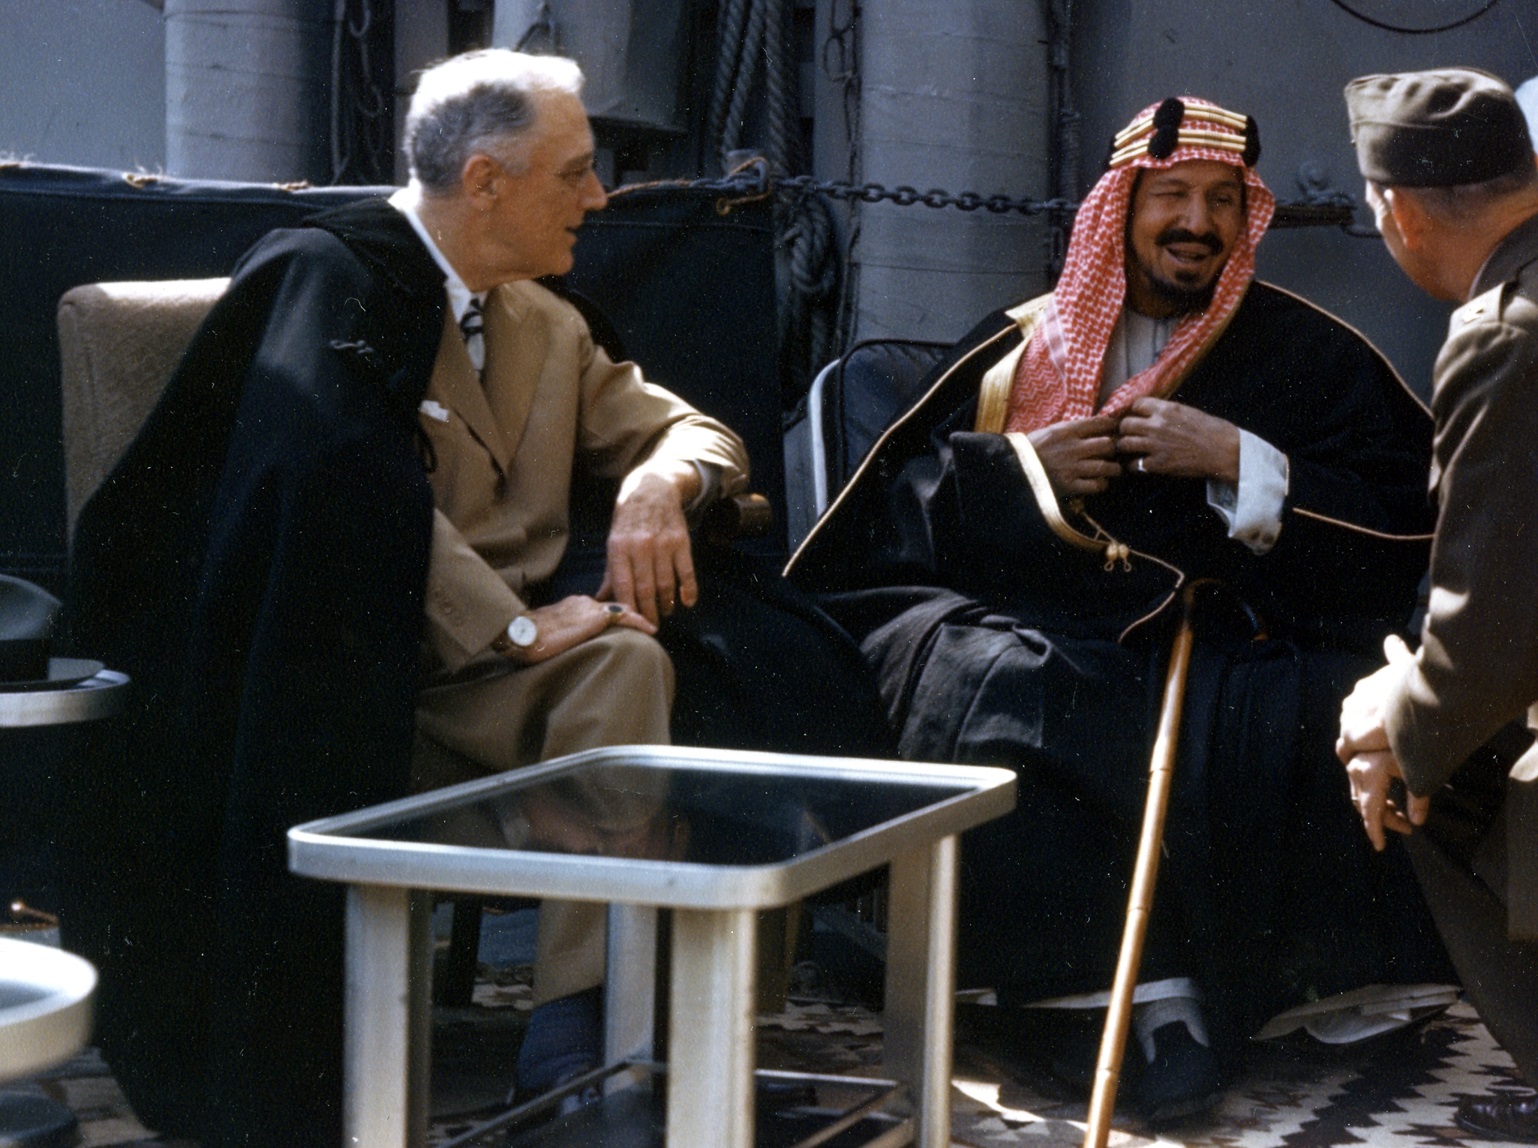 Franklin_D._Roosevelt_with_King_Ibn_Saud_aboard_USS_Quincy_(CA-71)_on_14_February_1945_(USA-C-545).jpg